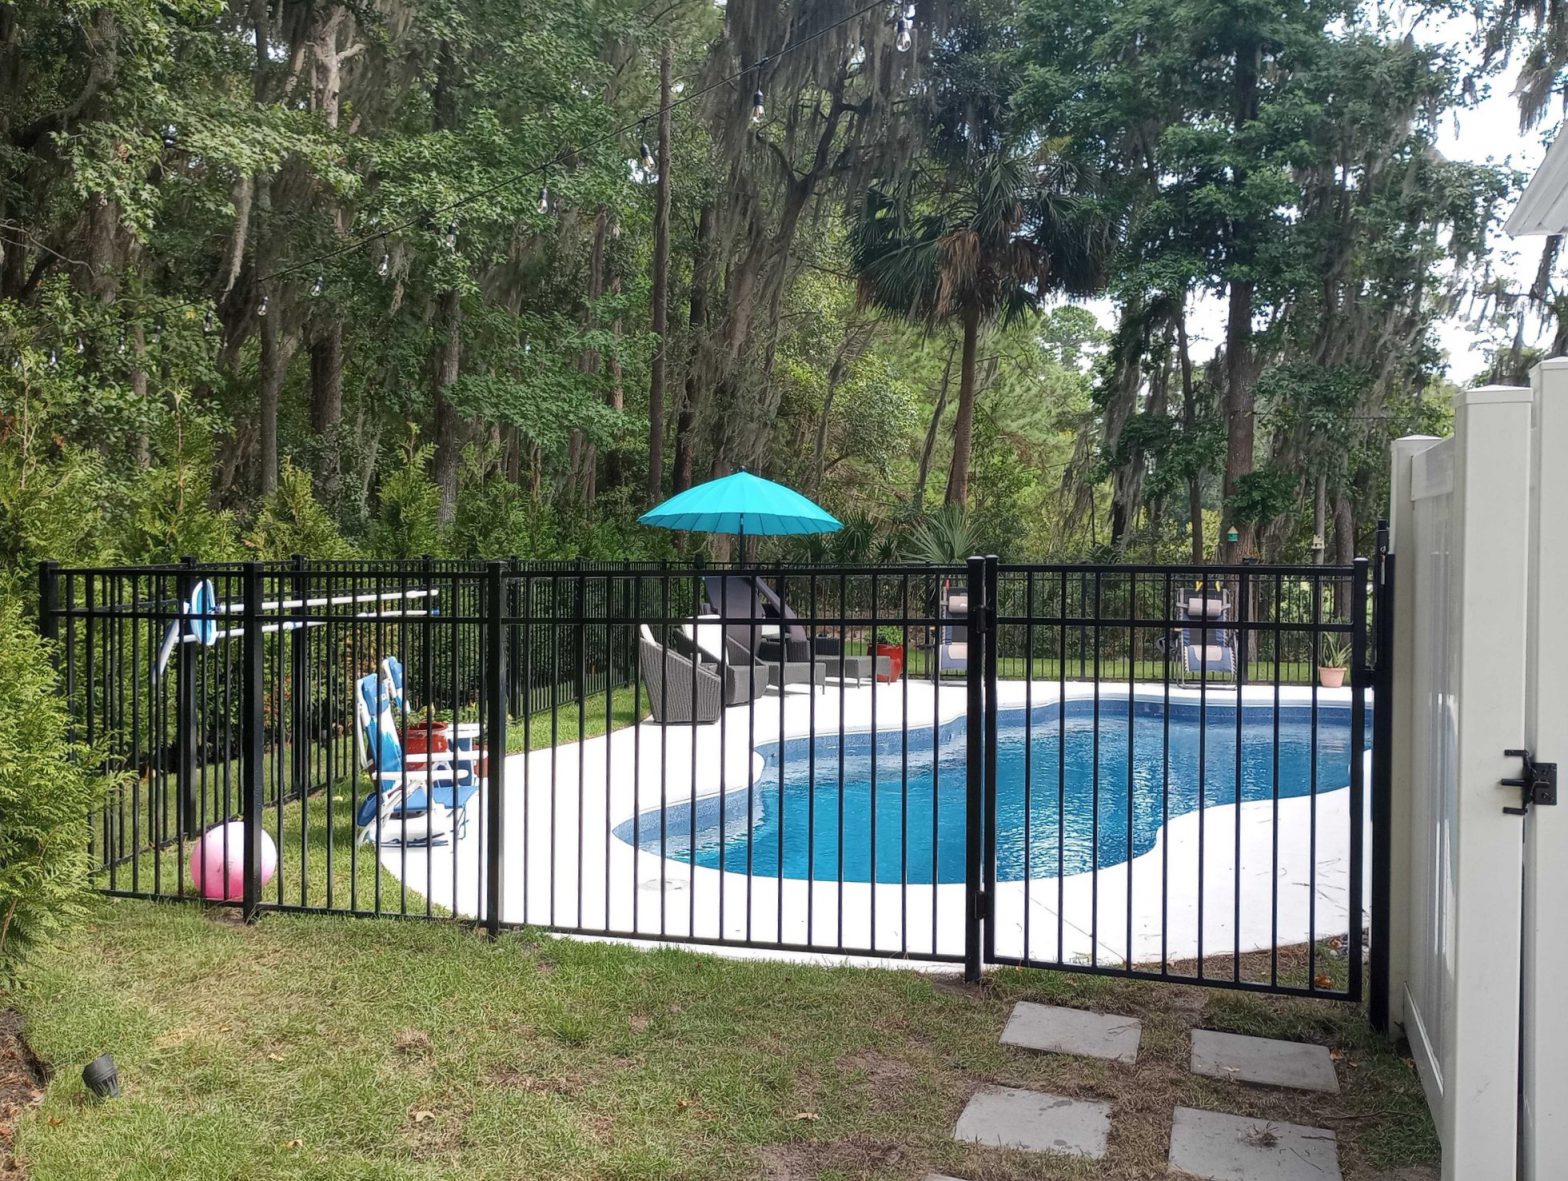 Photo of a black aluminum fence around a pool